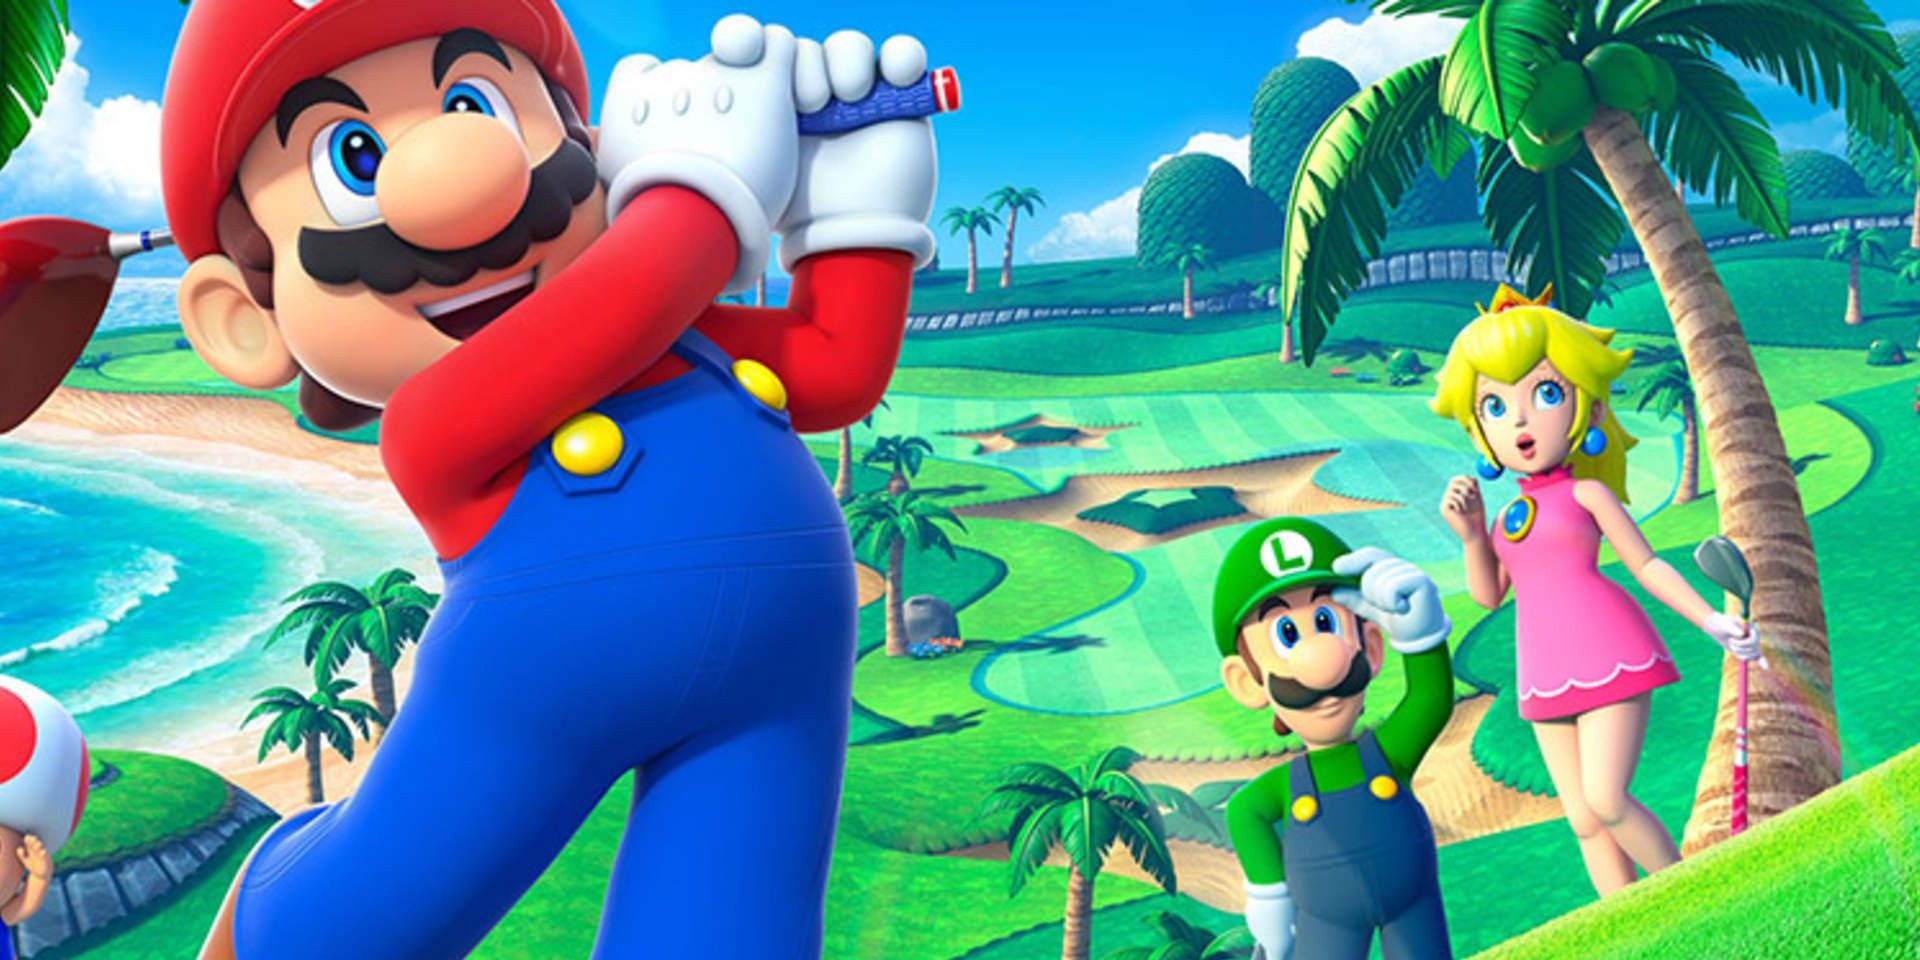 will there be a mario golf for switch